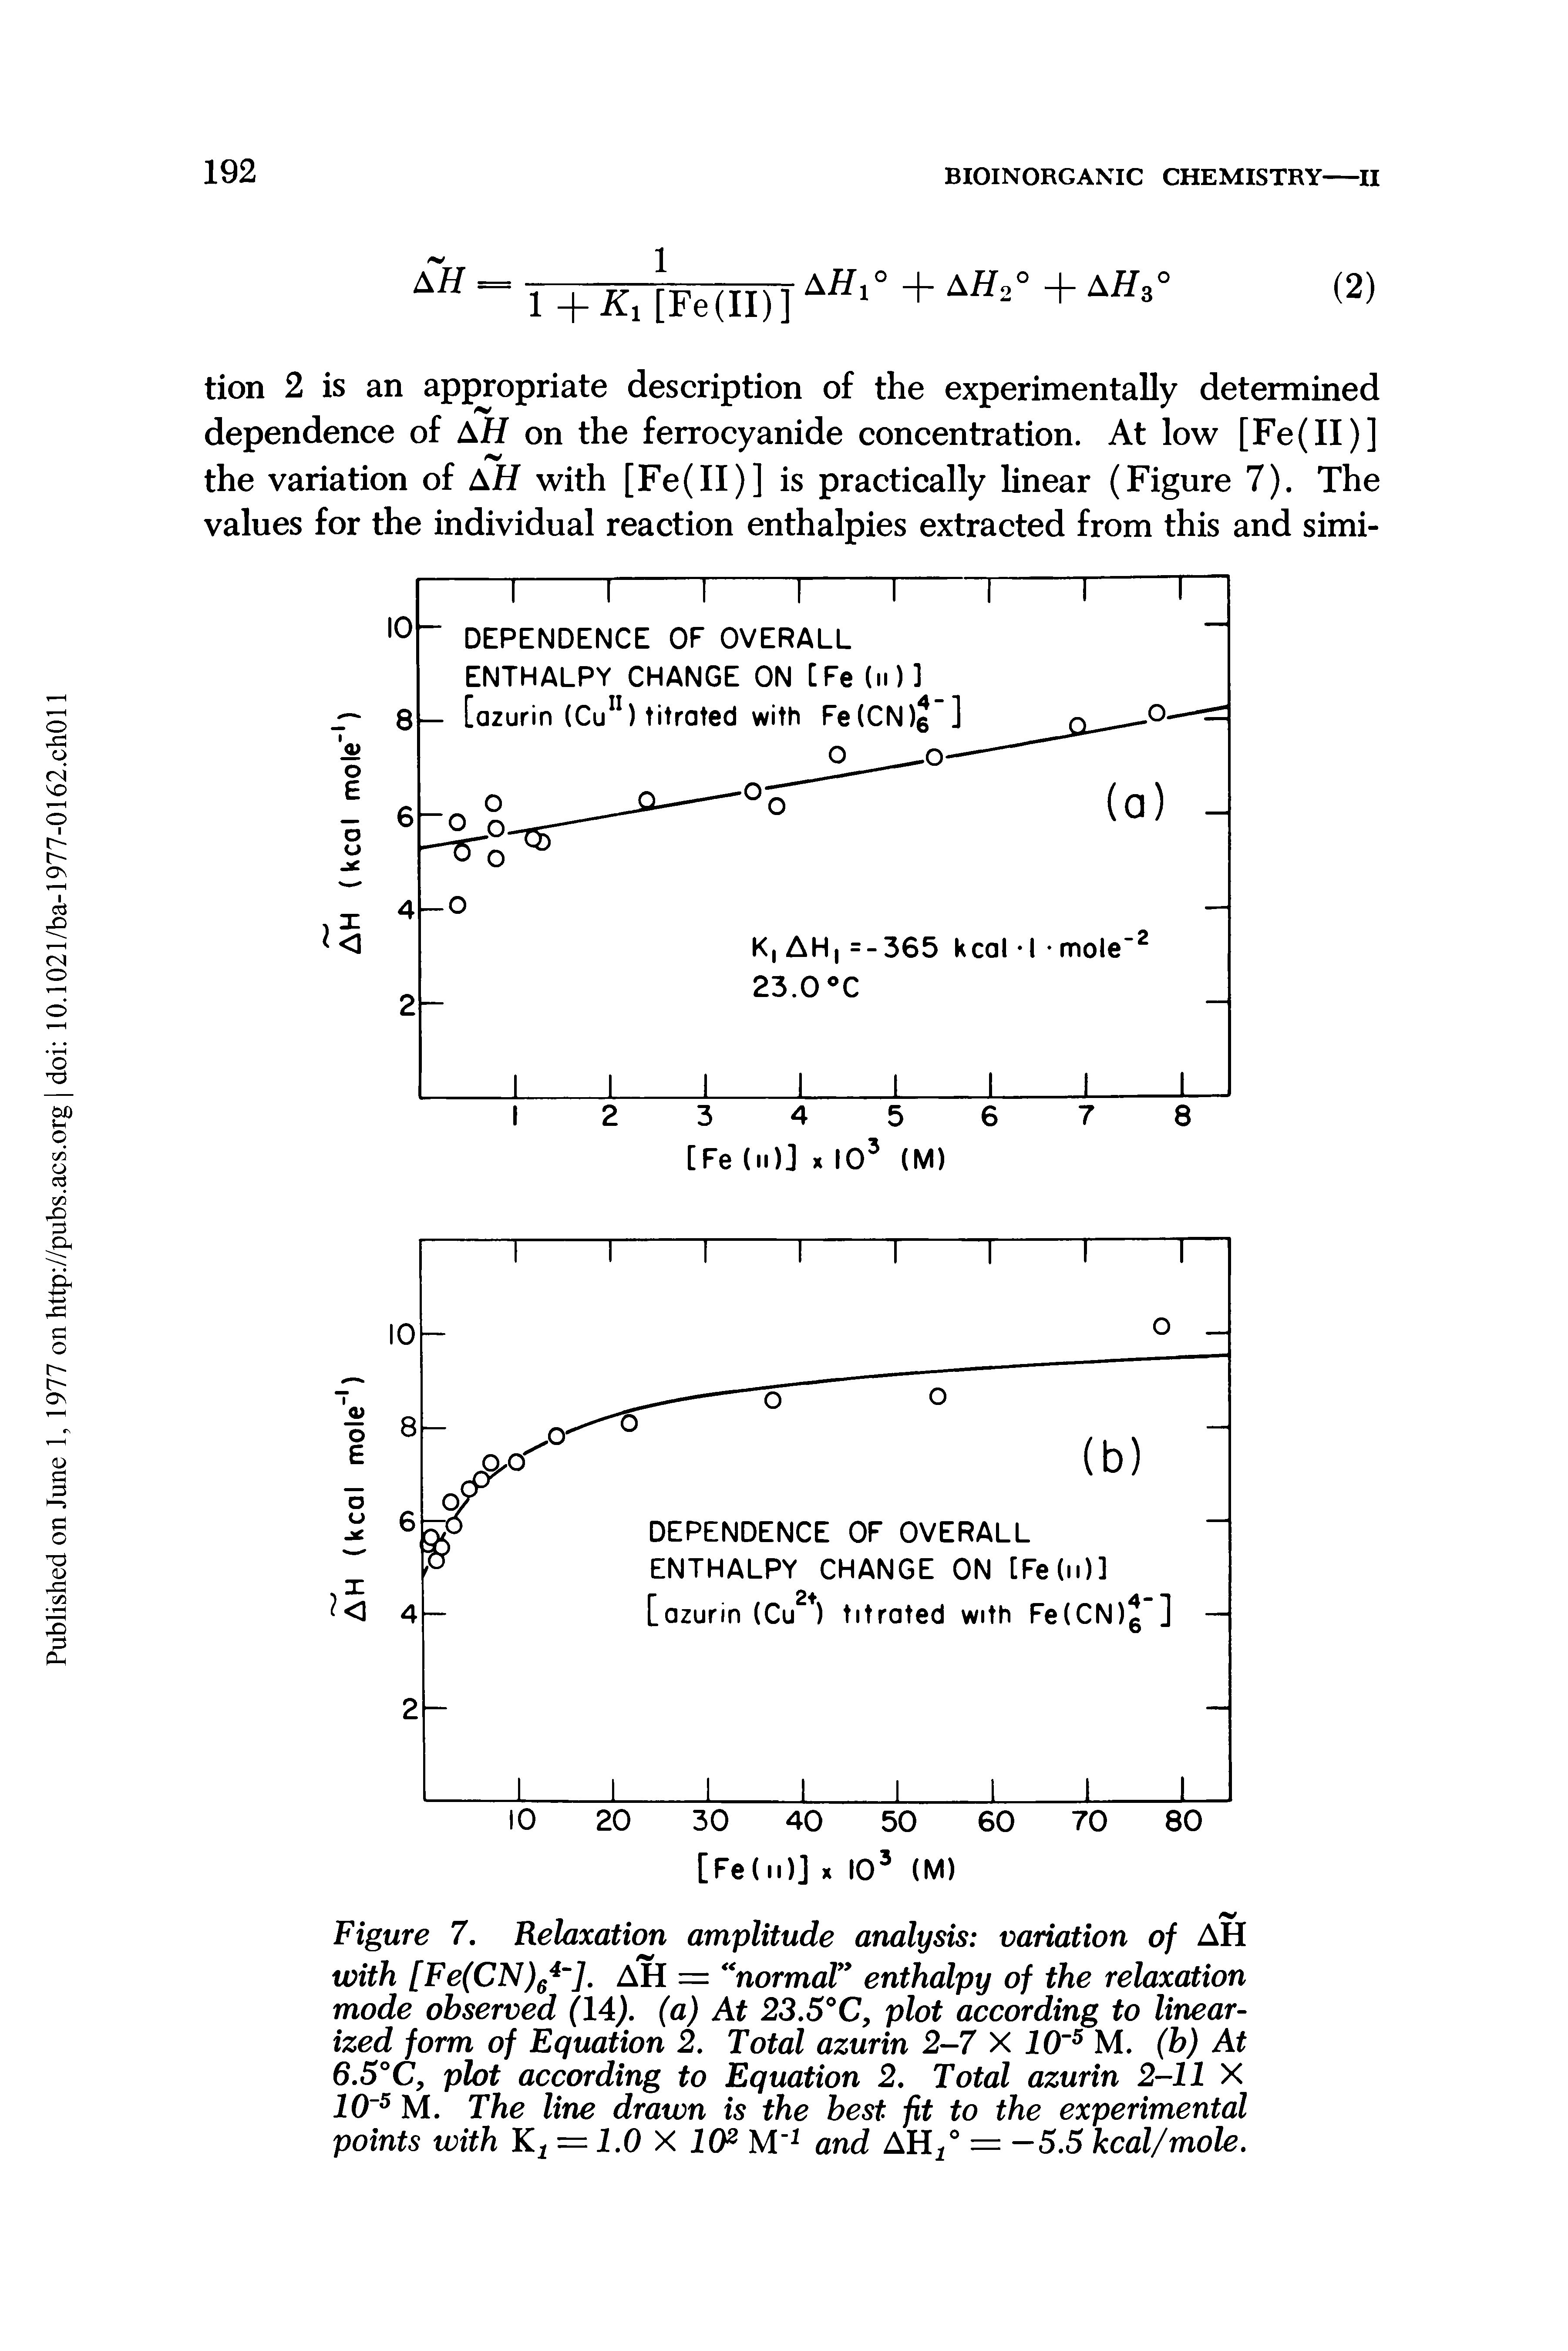 Figure 7. Relaxation amplitude analysis variation of AH with [Fe(CN)64 ]. AH = normal enthalpy of the relaxation mode observed (14). (a) At 23.5°C, plot according to linearized form of Equation 2. Total azurin 2-7 X 10 5 M. (b) At 6.5°C, plot according to Equation 2. Total azurin 2-11 X 10 5 M. The line drawn is the best fit to the experimental points with Kt = 1.0 X 102 M 1 and AH/ = —5.5 kcal/mole.